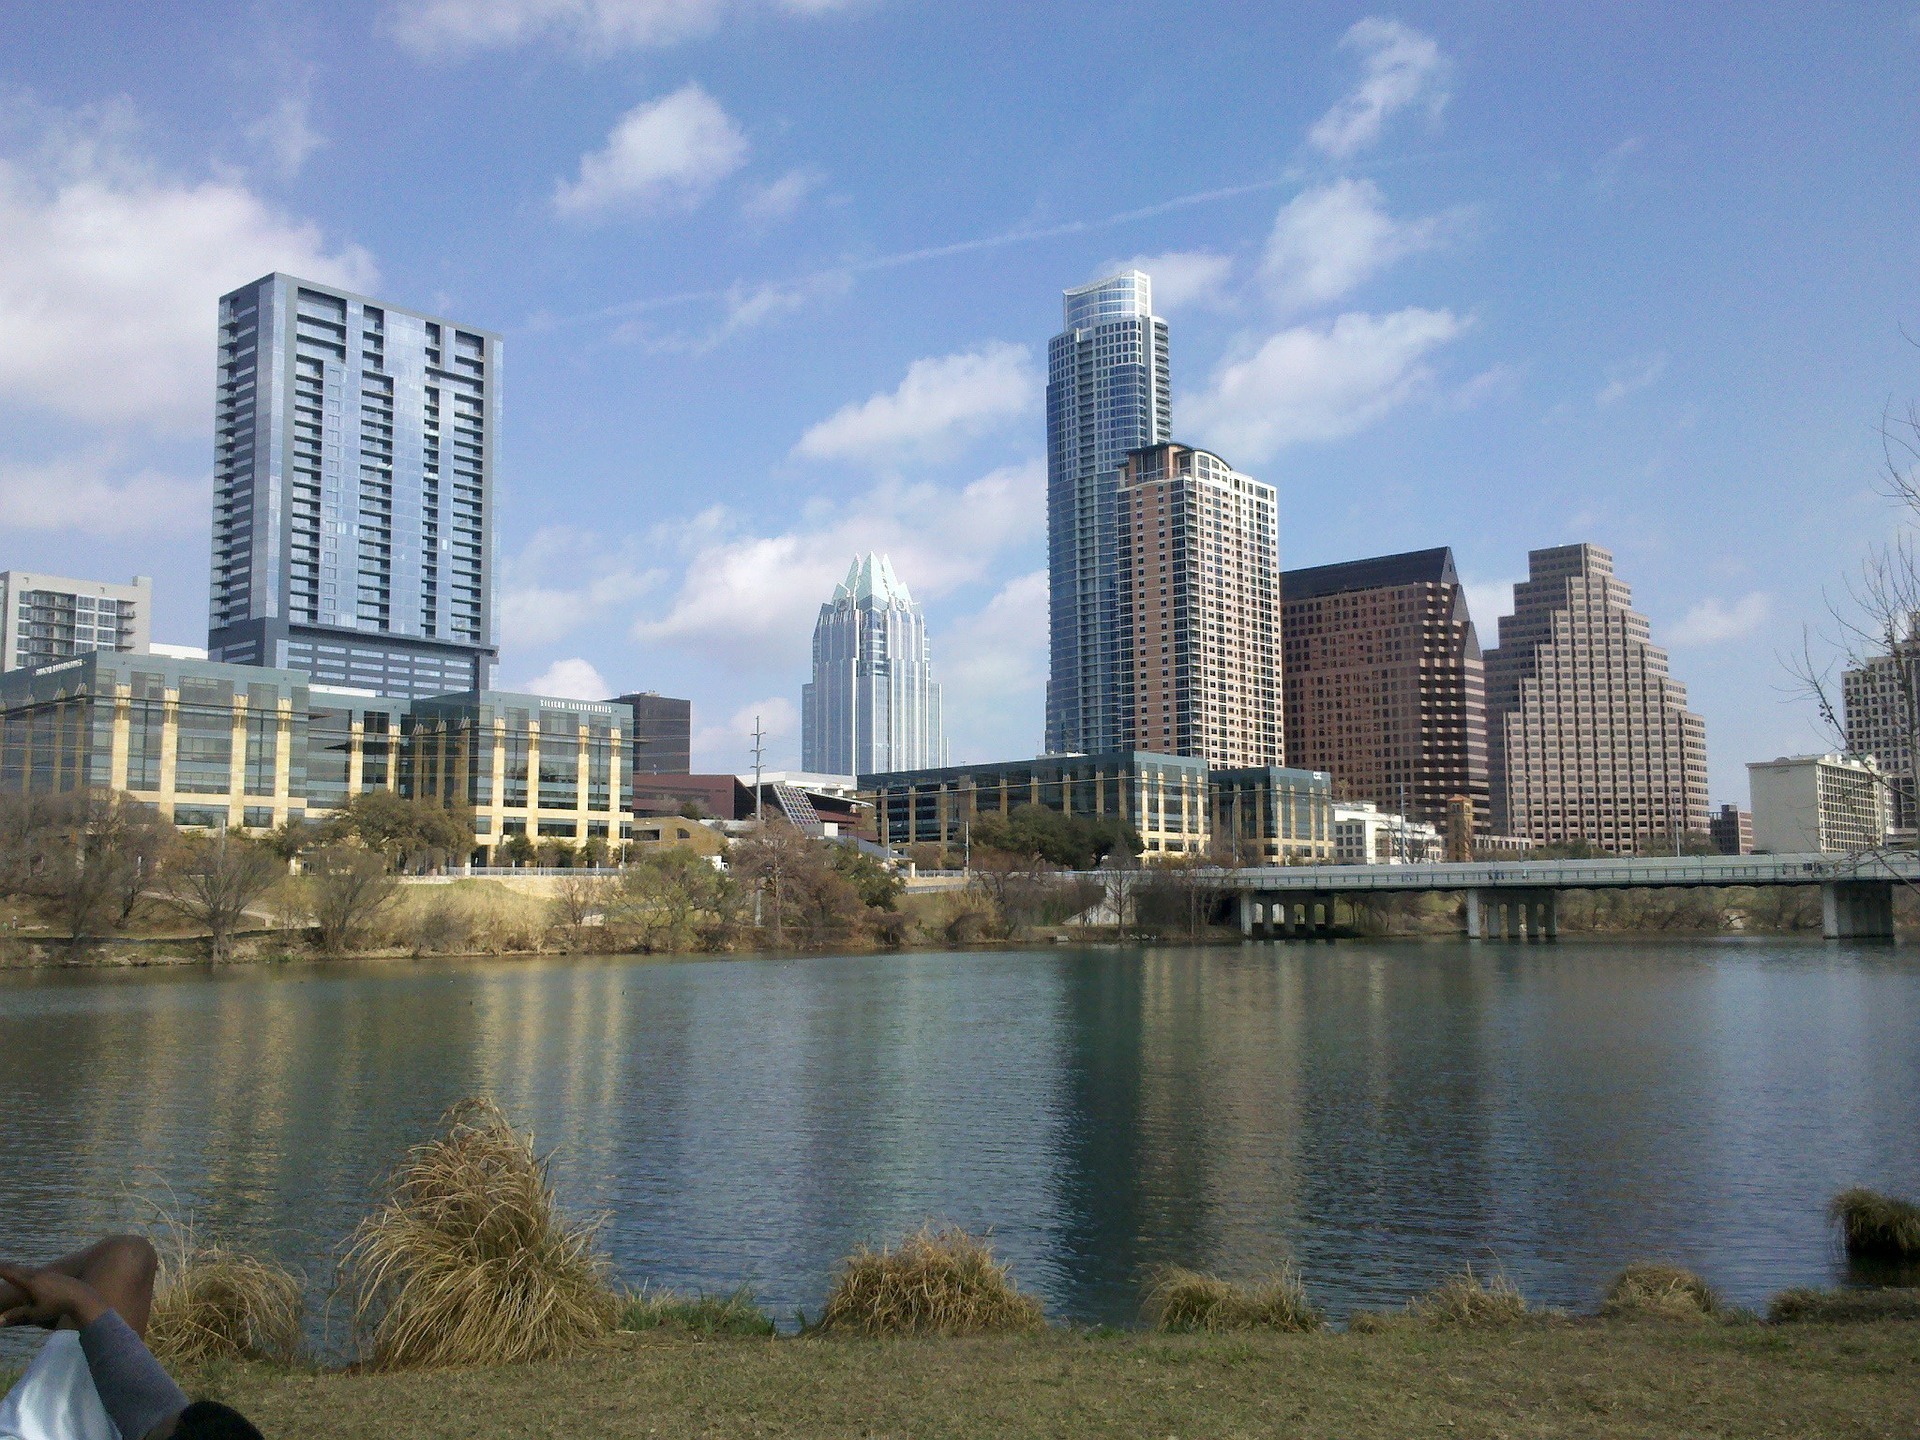 Austin is the state capital of Texas.